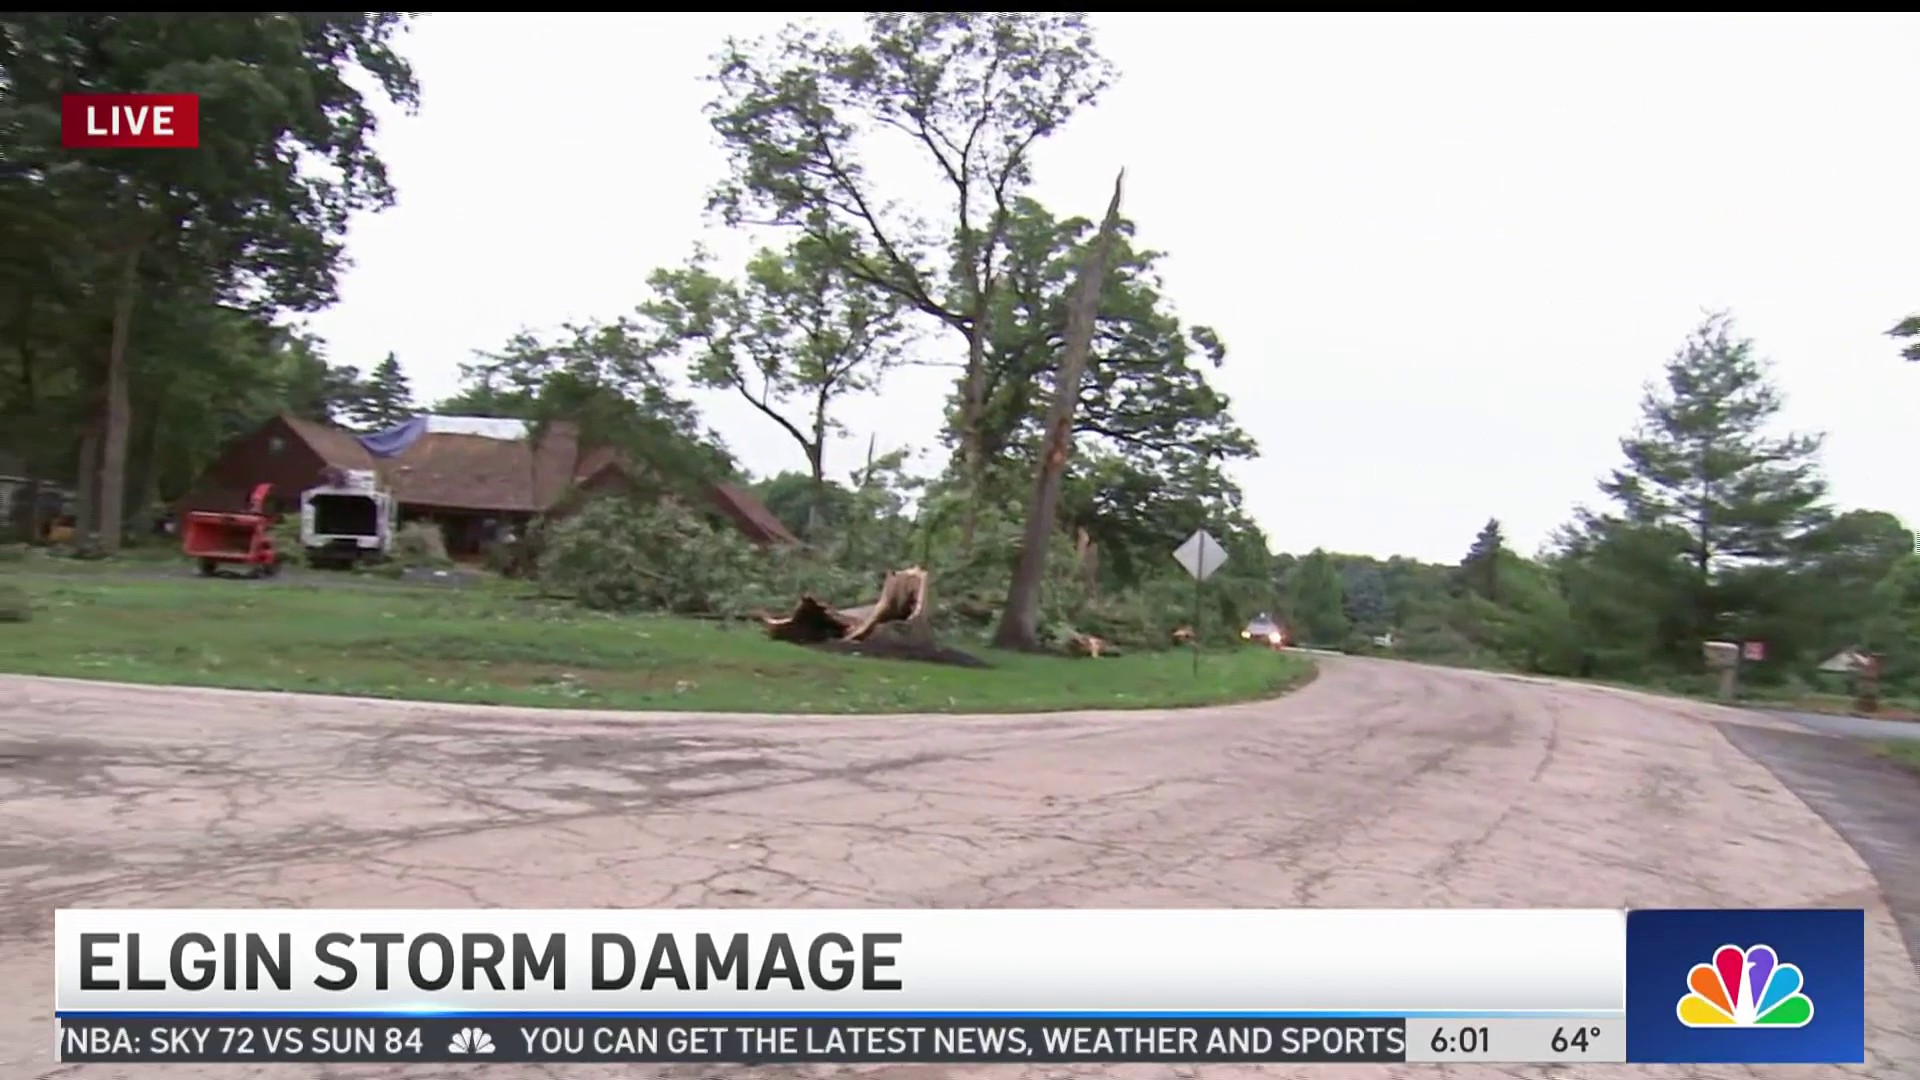 Major storm damage in Elgin following multiple tornado touch downs in Northeast Illinois